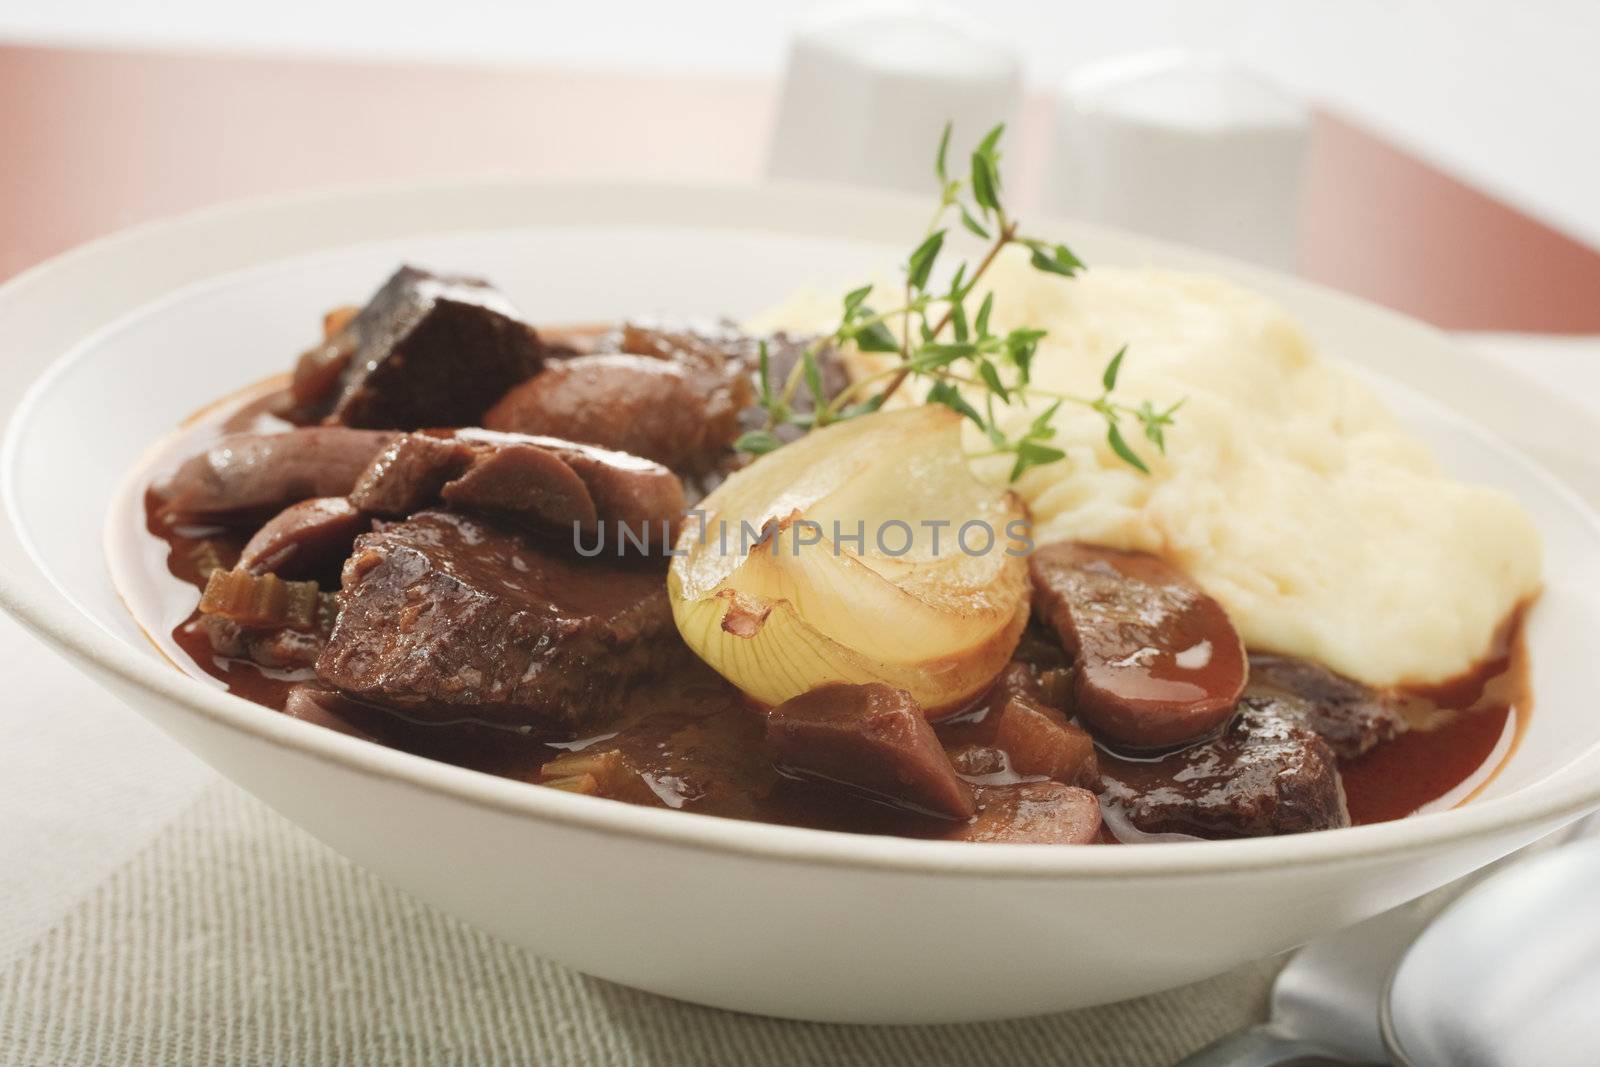 Braised beef with mushrooms and onion, cooked in red wine and served in a bowl with mashed potato.